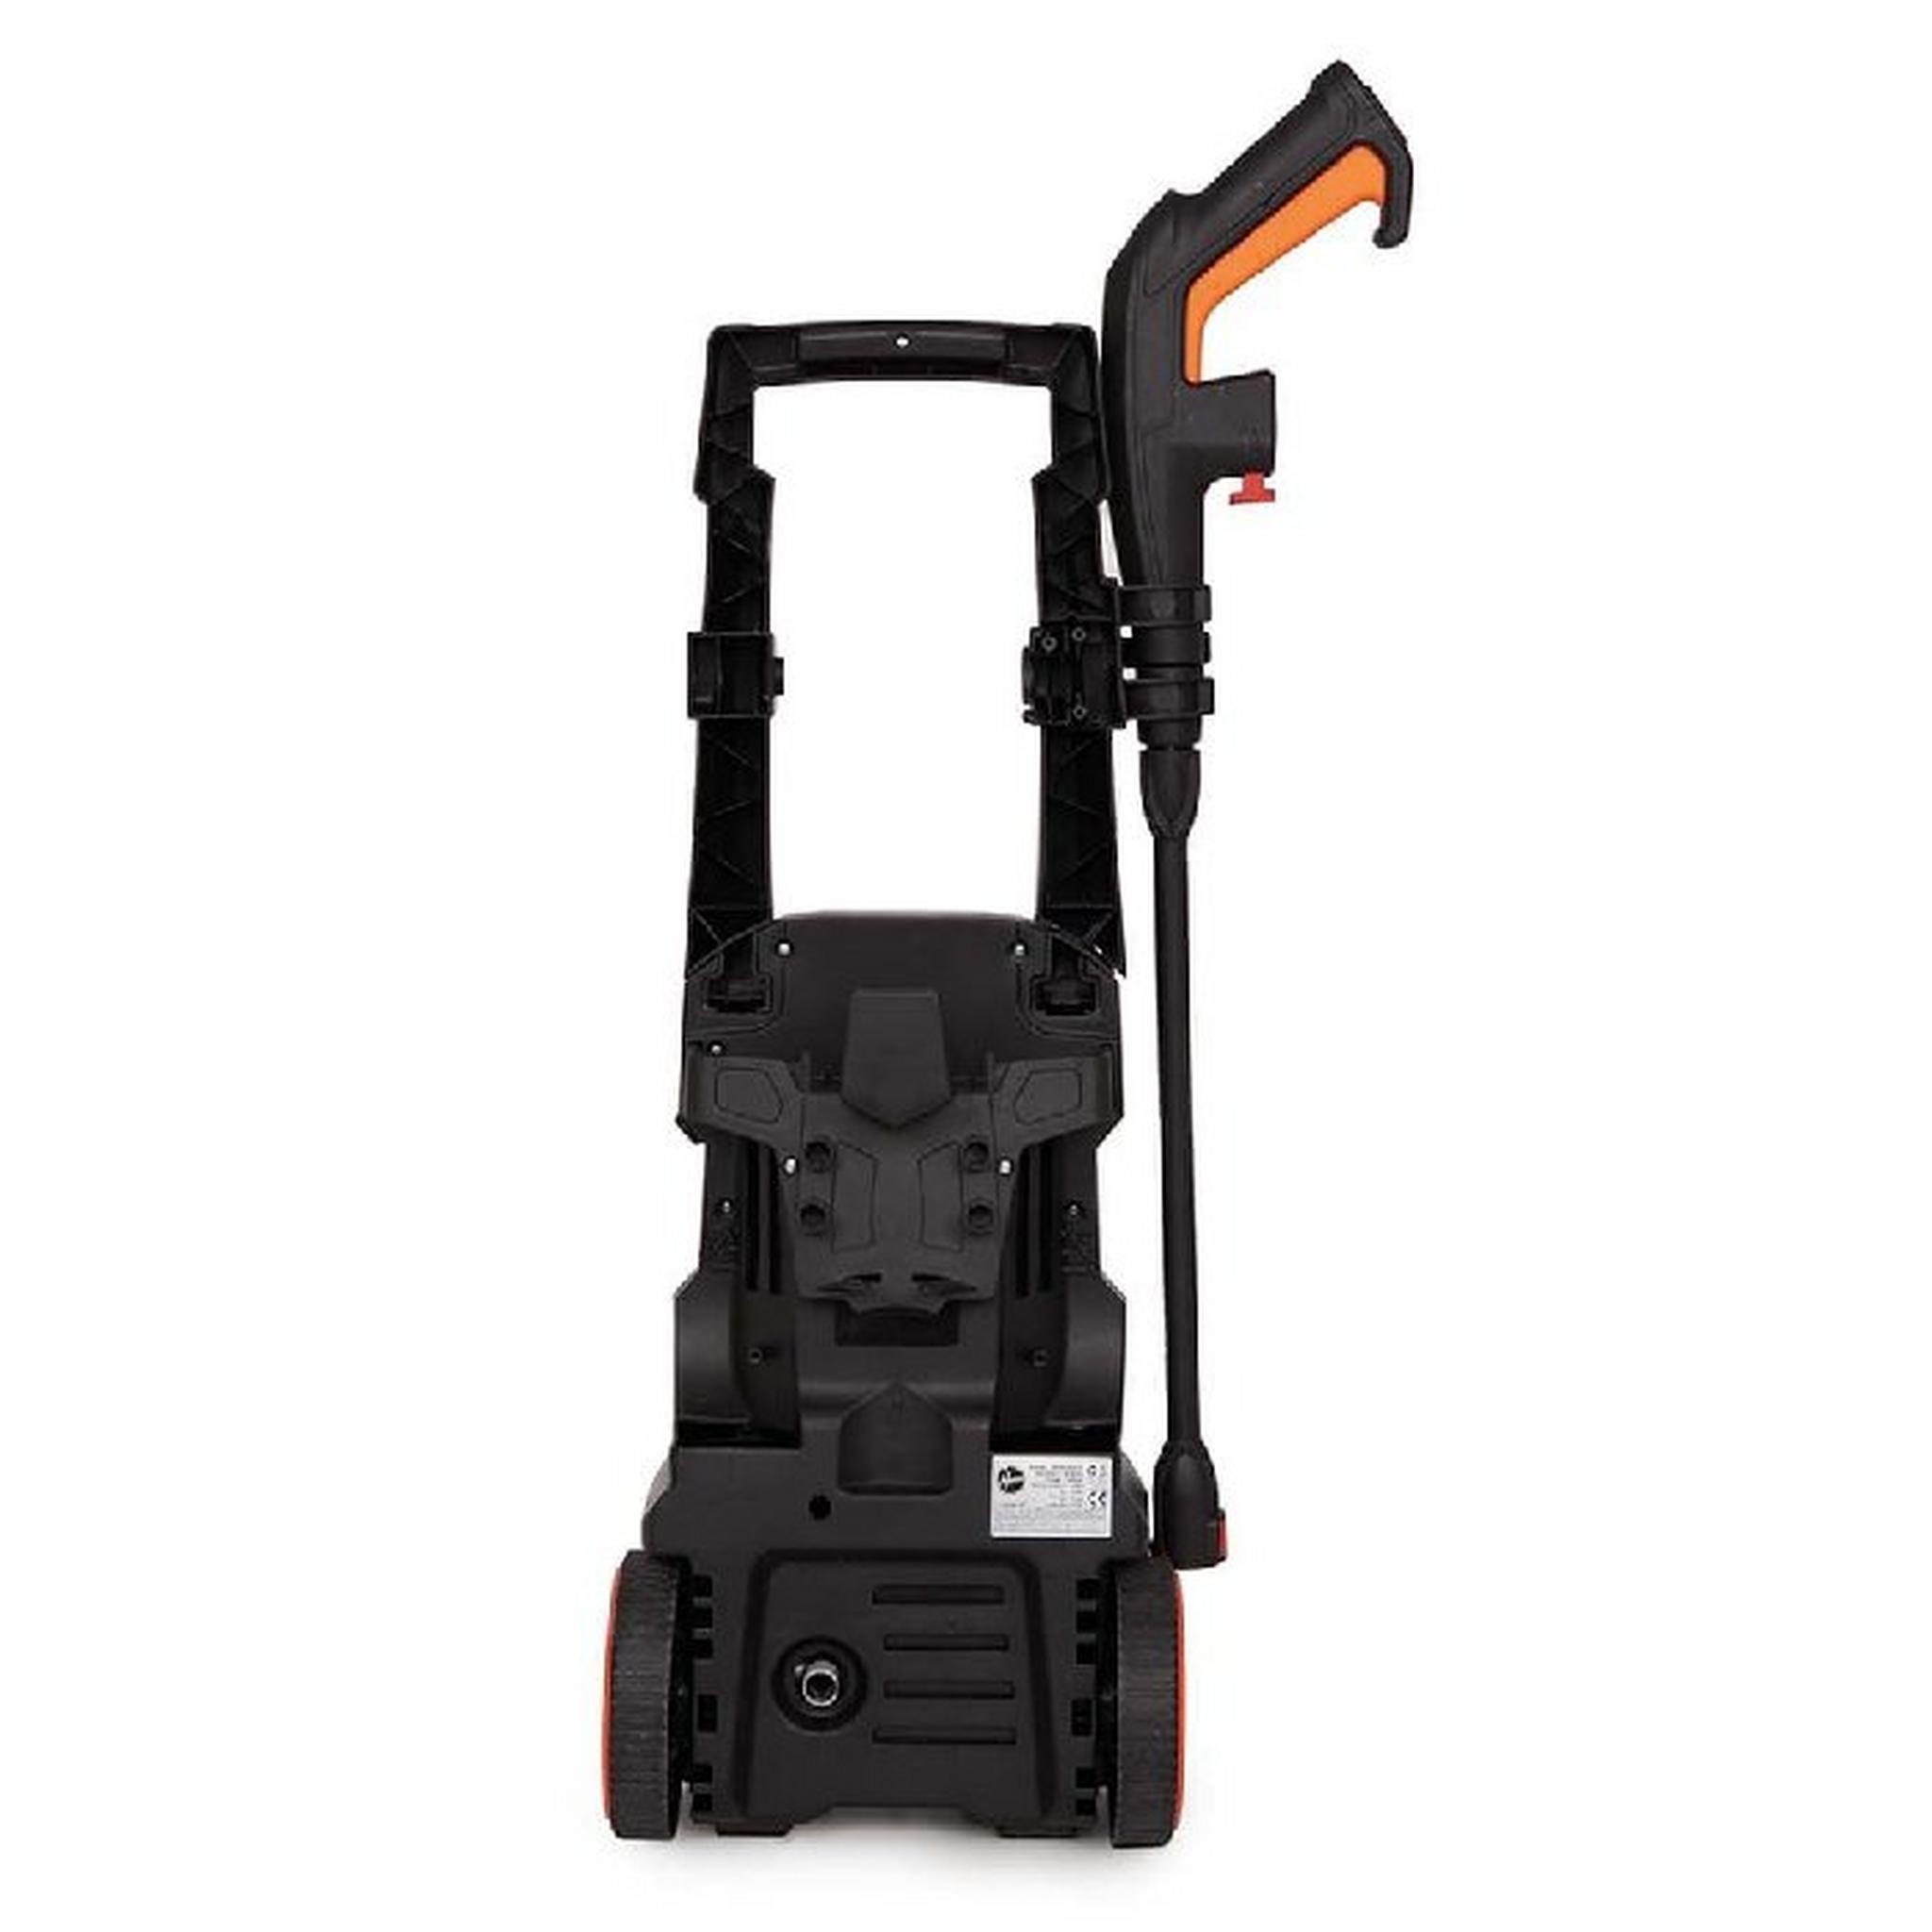 Hoover Pressure Washer With 9 Accessories, 2800W, 165 Bar, HPW-M2816 – Black and Orange